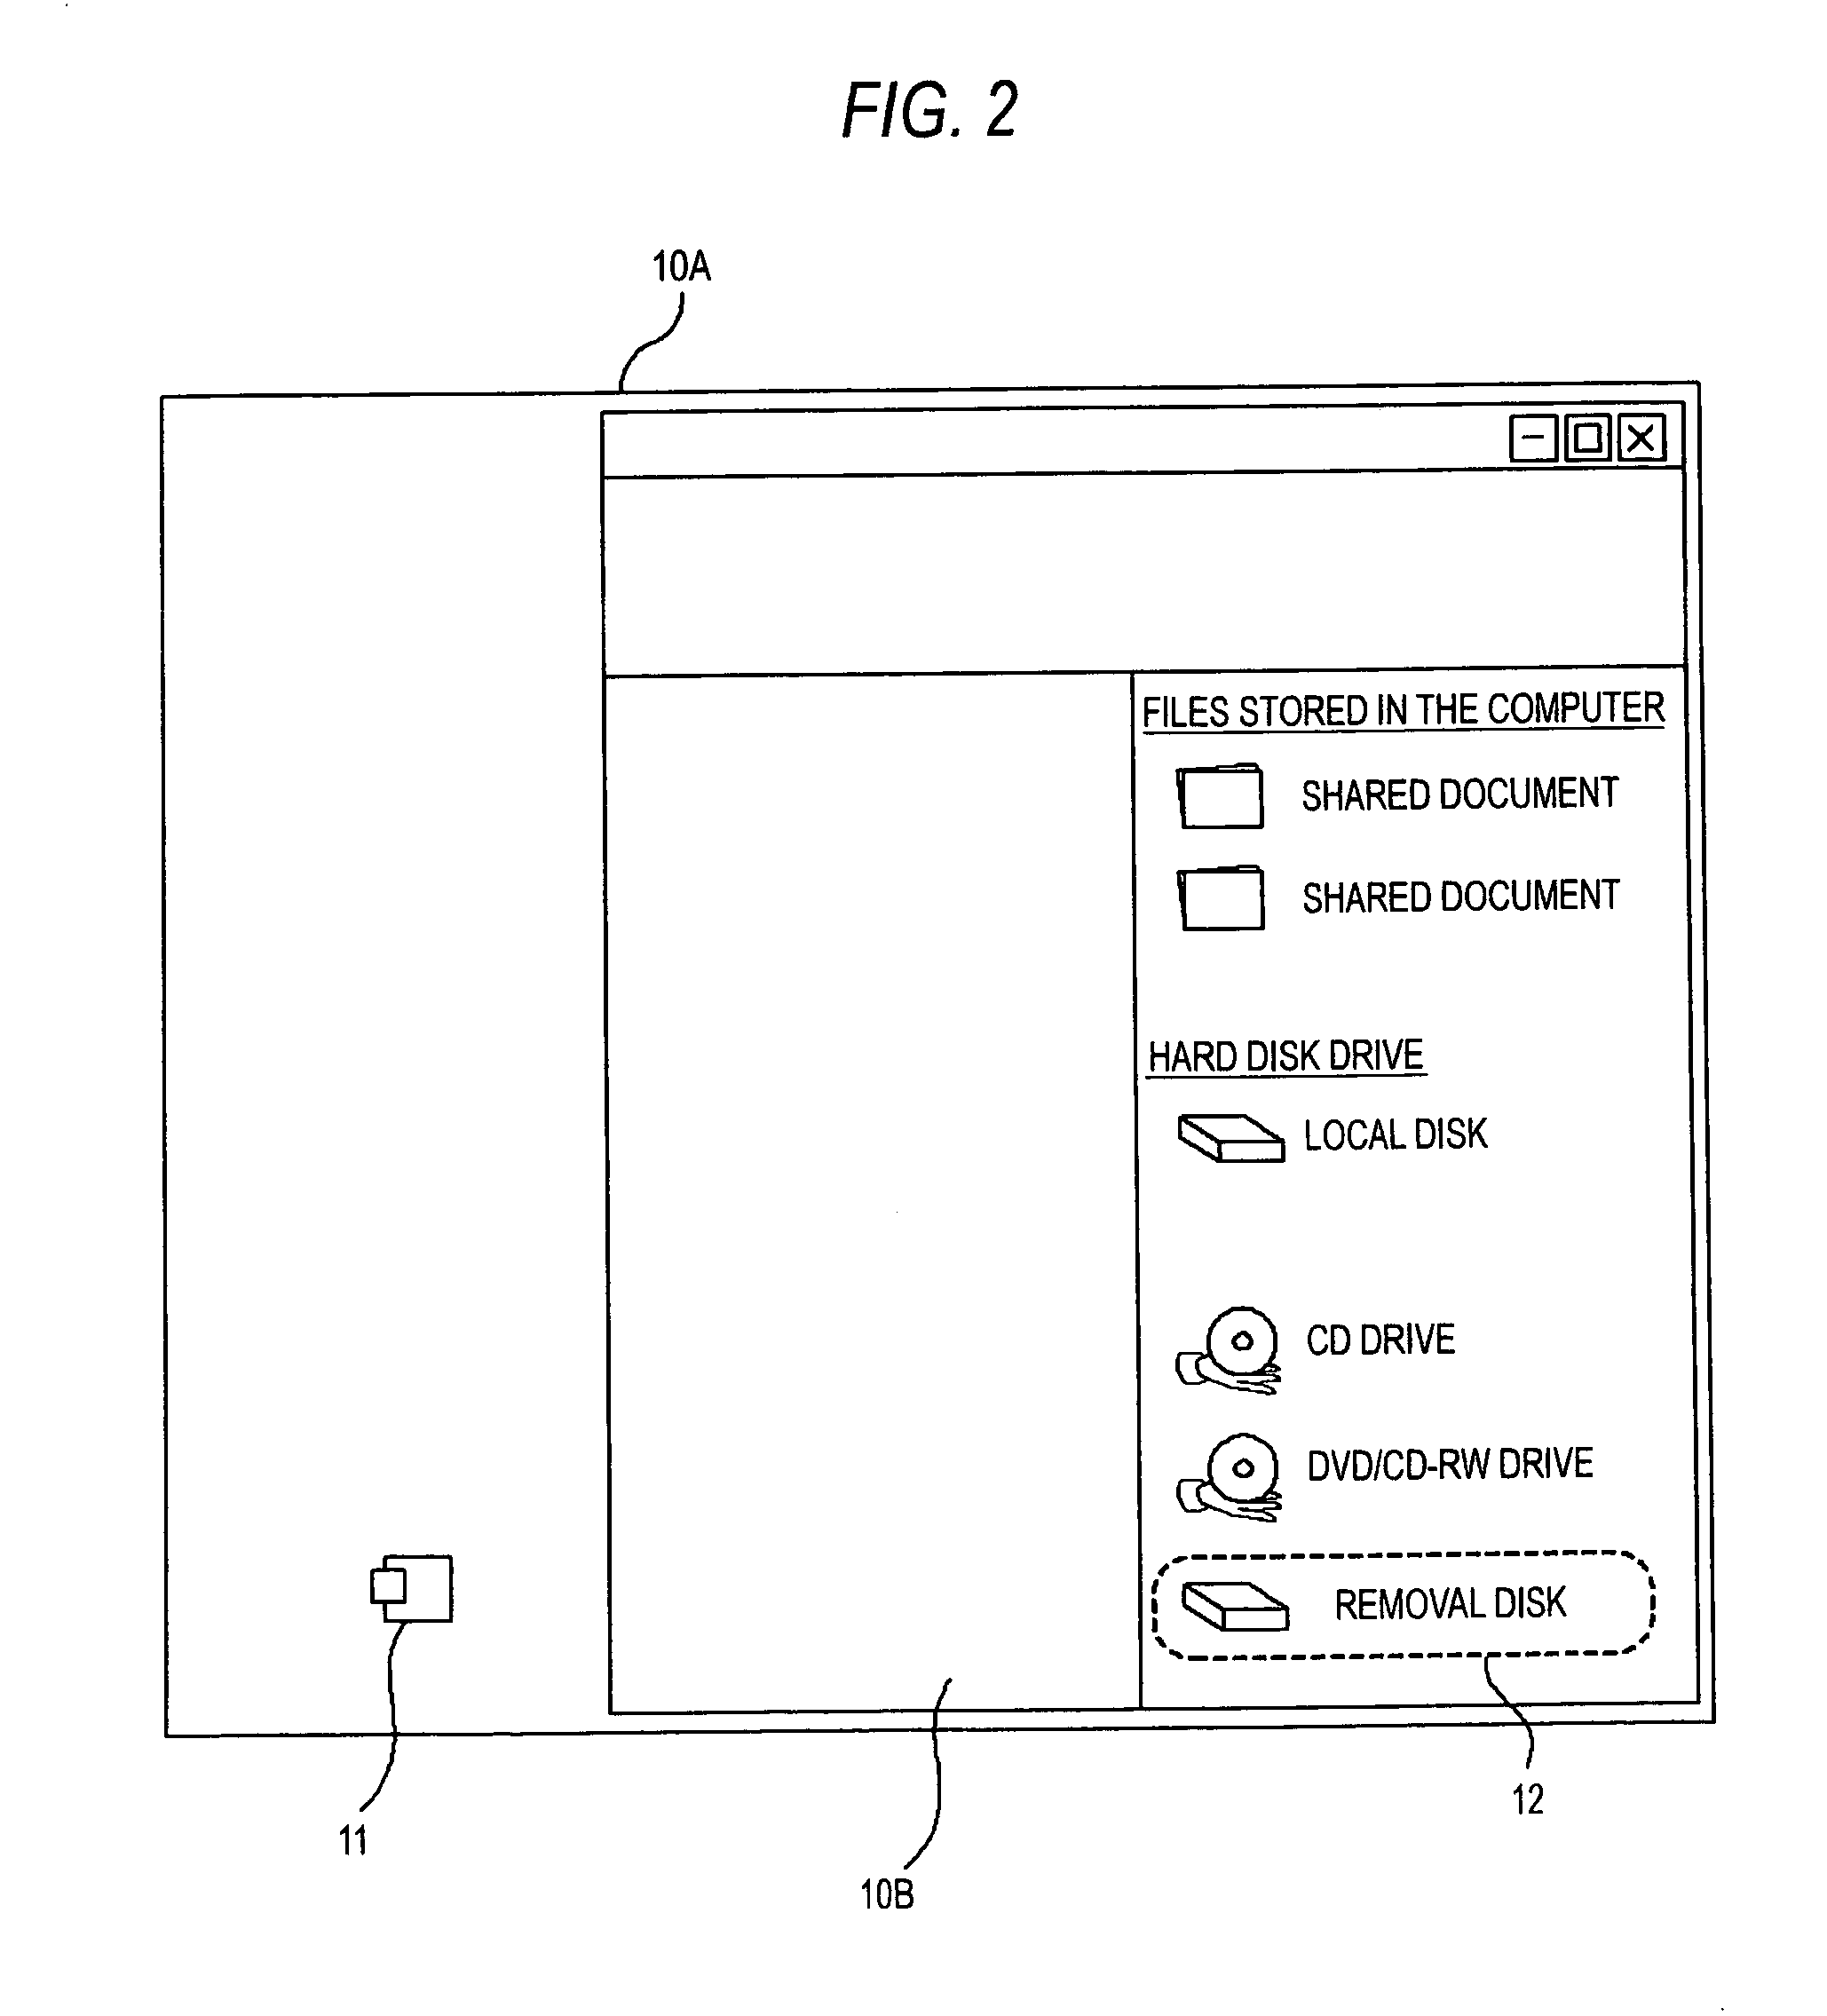 Data control apparatus functioning as a USB mass storage device